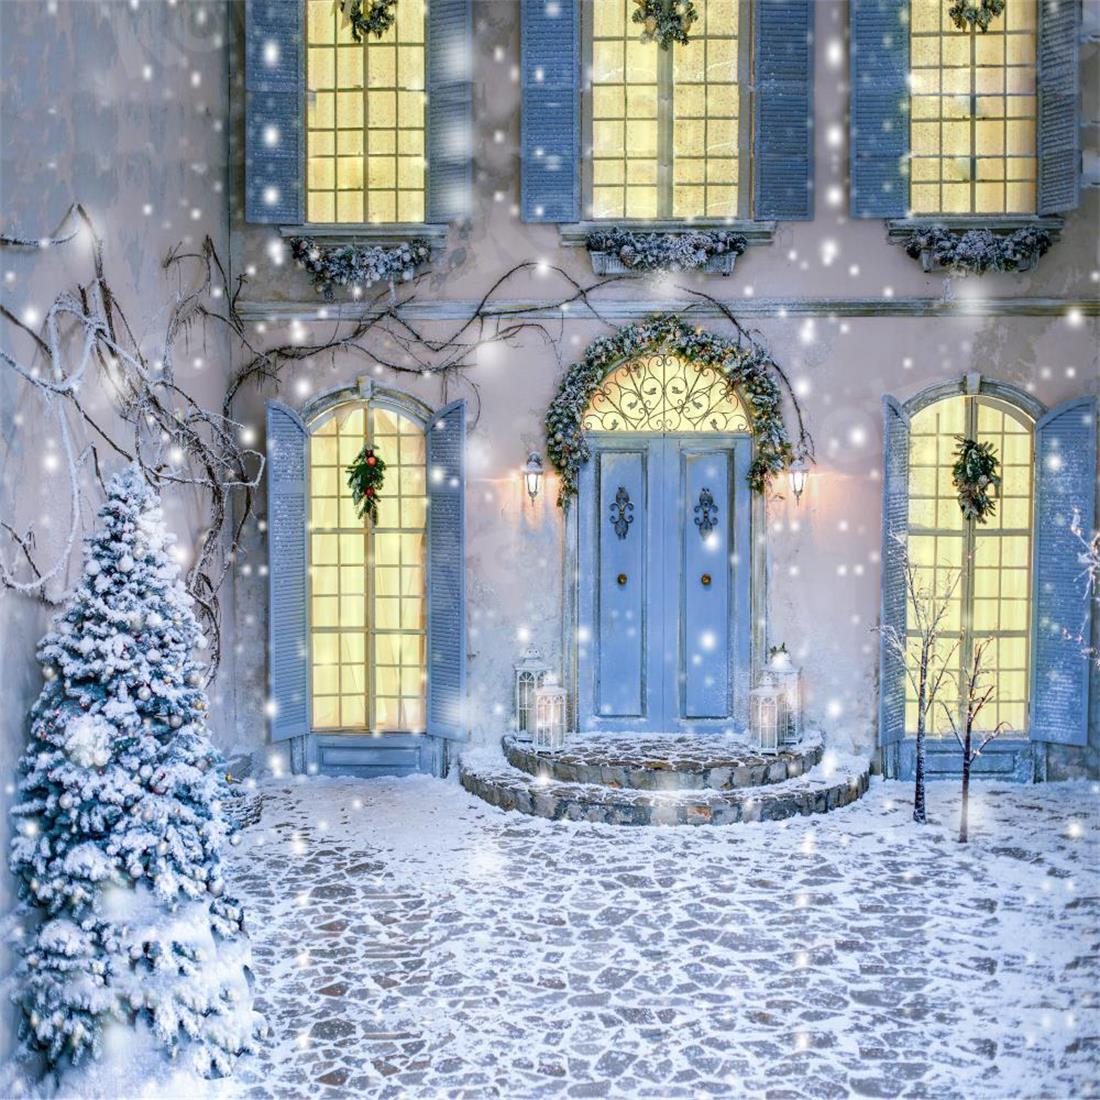 Kate Christmas Winter Courtyard Backdrop Designed By Jerry_Sina